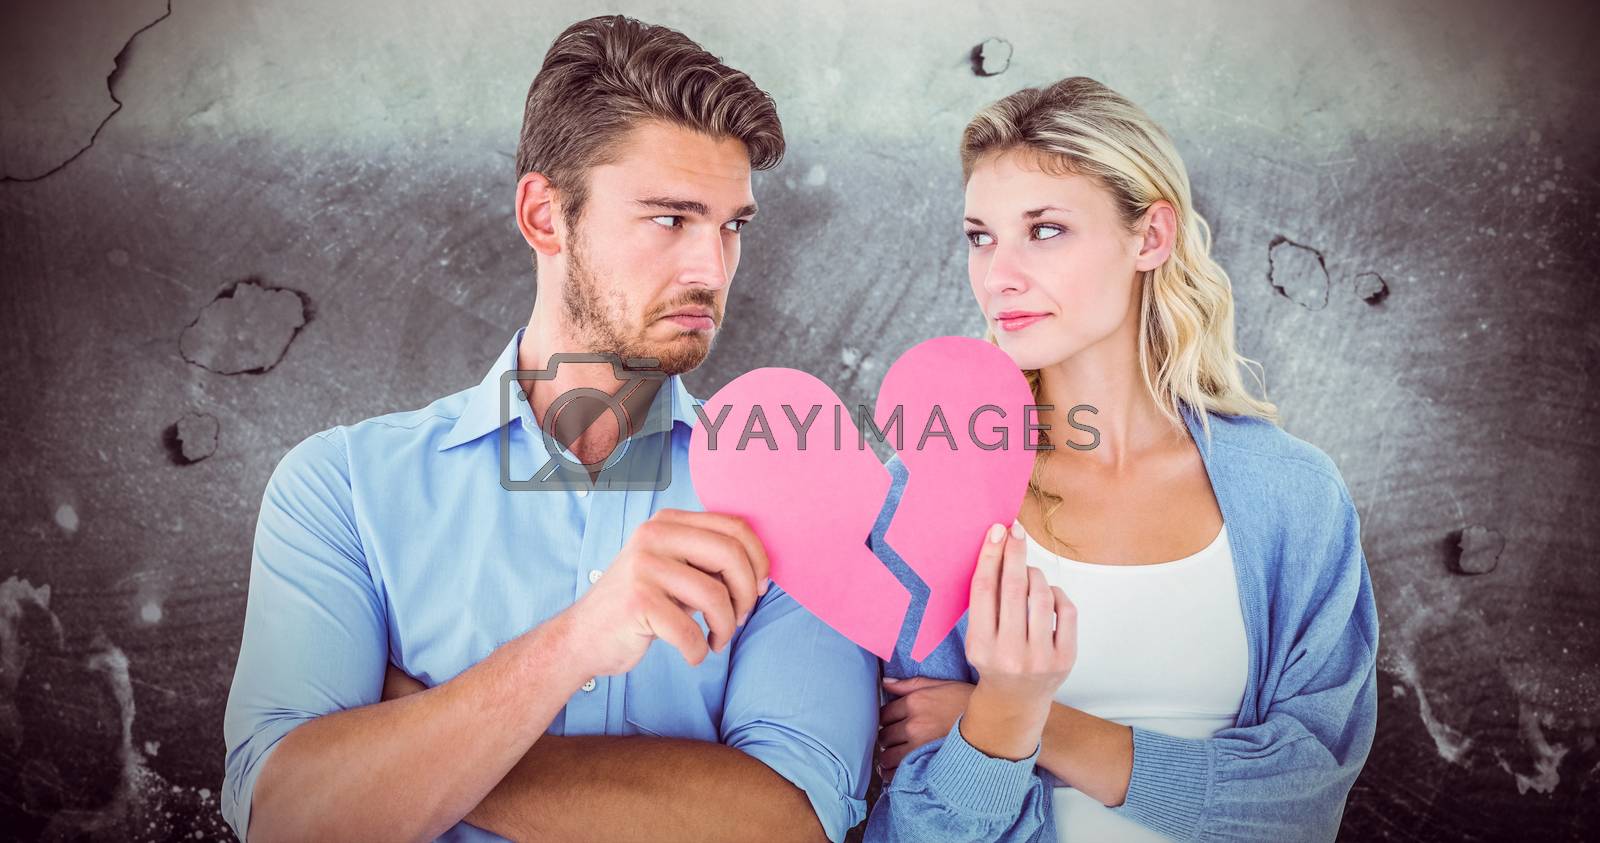 Royalty free image of Composite image of couple holding two halves of broken heart by Wavebreakmedia